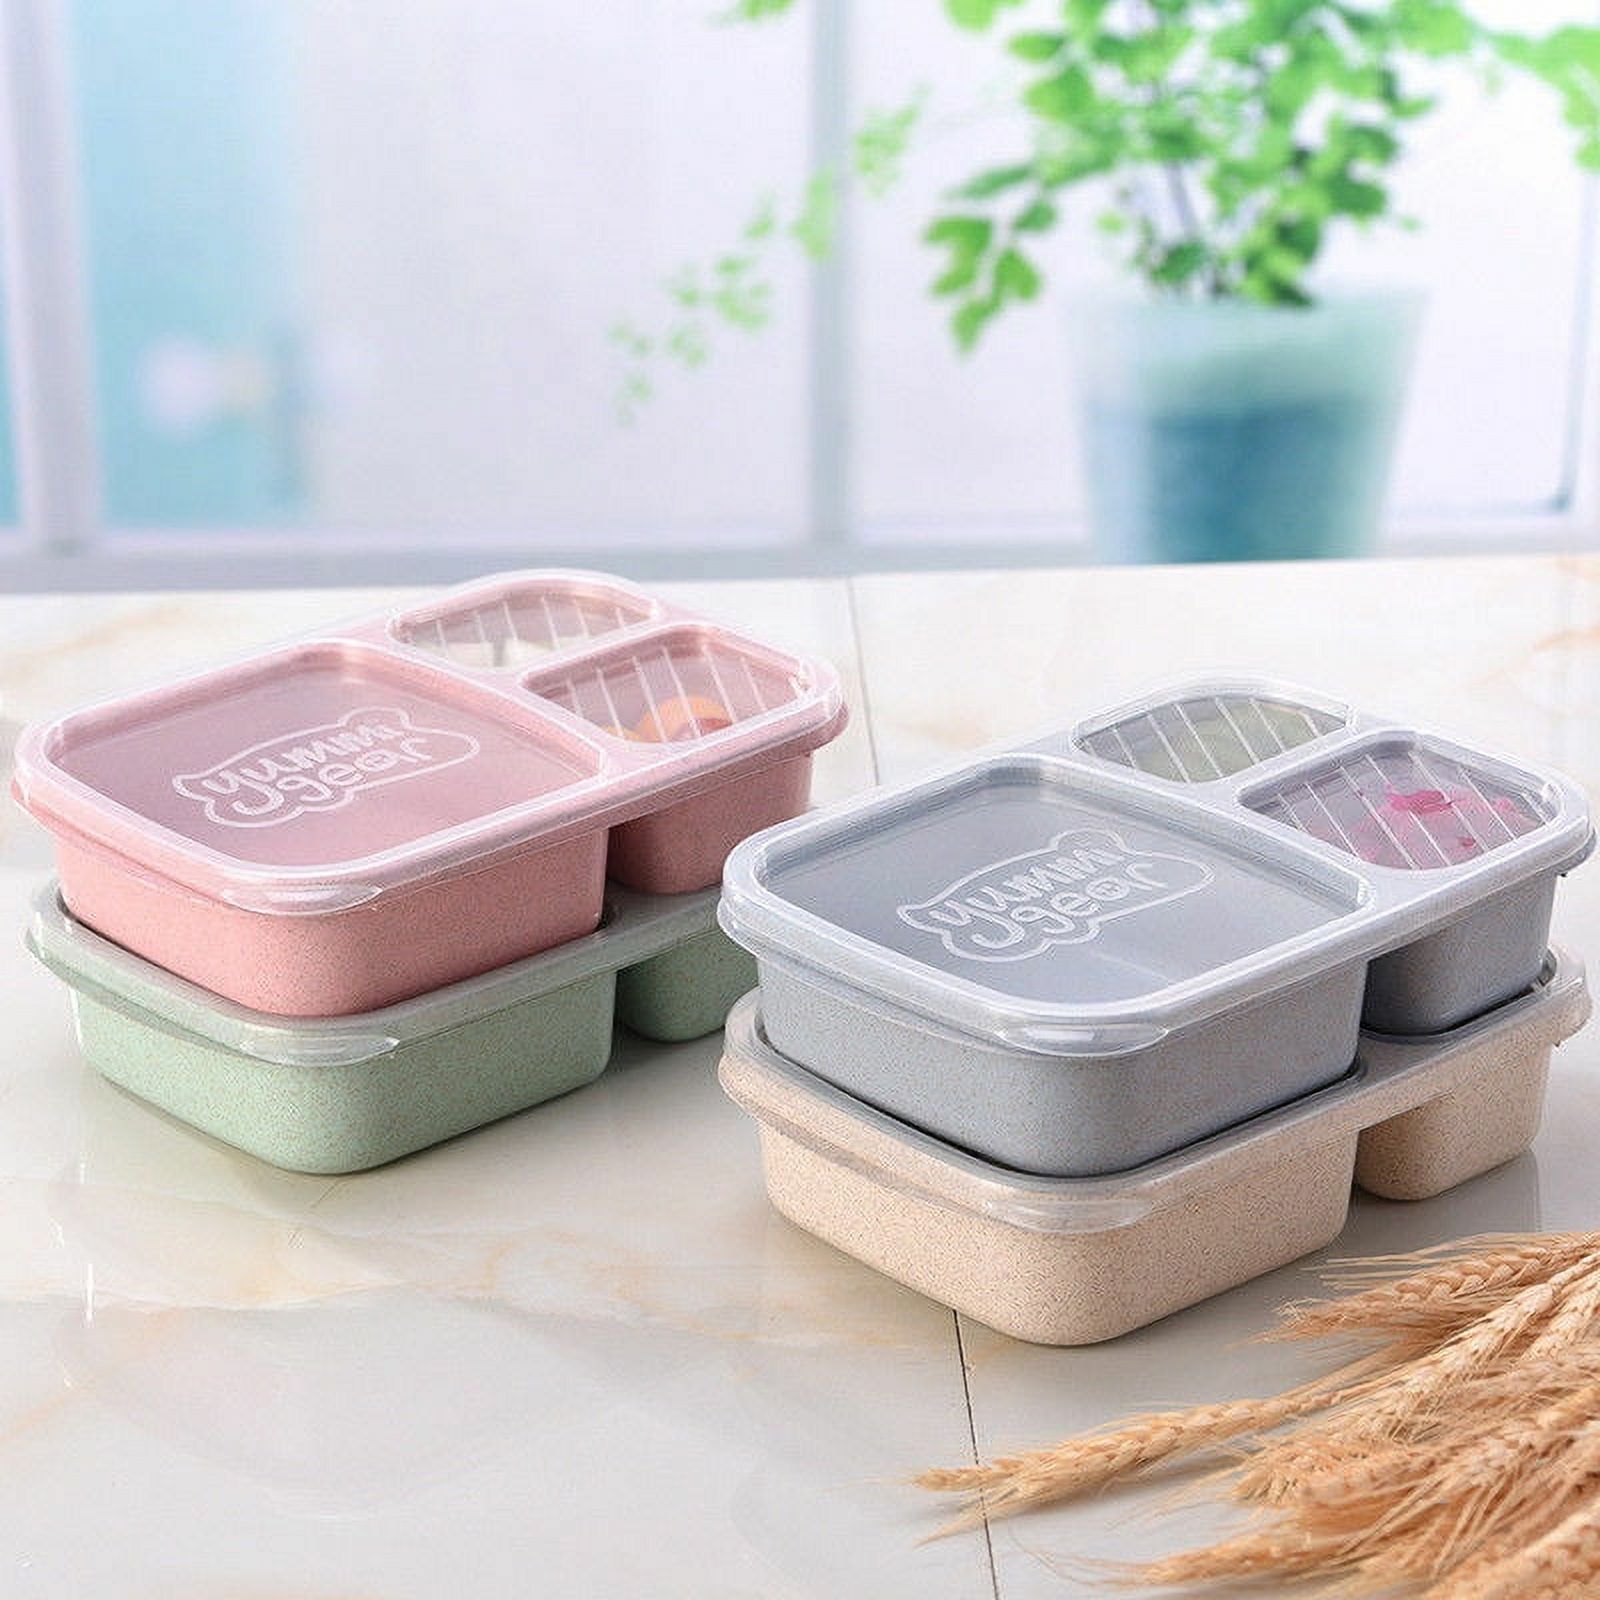 3 Layer Plastic Lunch Box Food Container Bento Lunch Boxes With 3-Compartment Microwave Picnic Food Container Storage Box - image 5 of 5